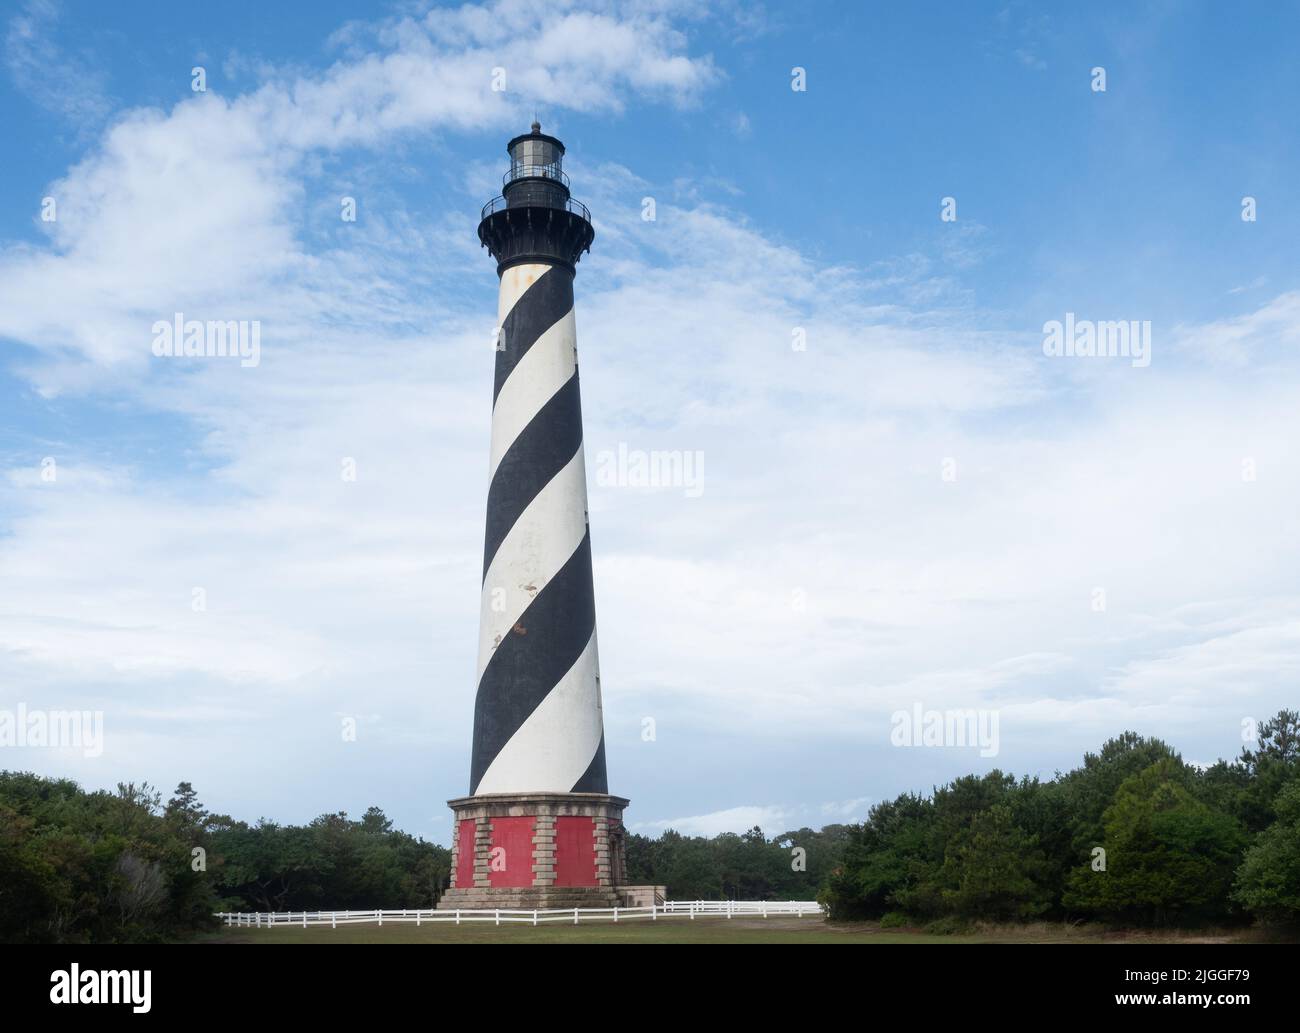 Cape Hatteras light station with black and white spiral stripes, sitting on a red pedestal. Located in Cape Hatteras National Seashore, North Carolina Stock Photo